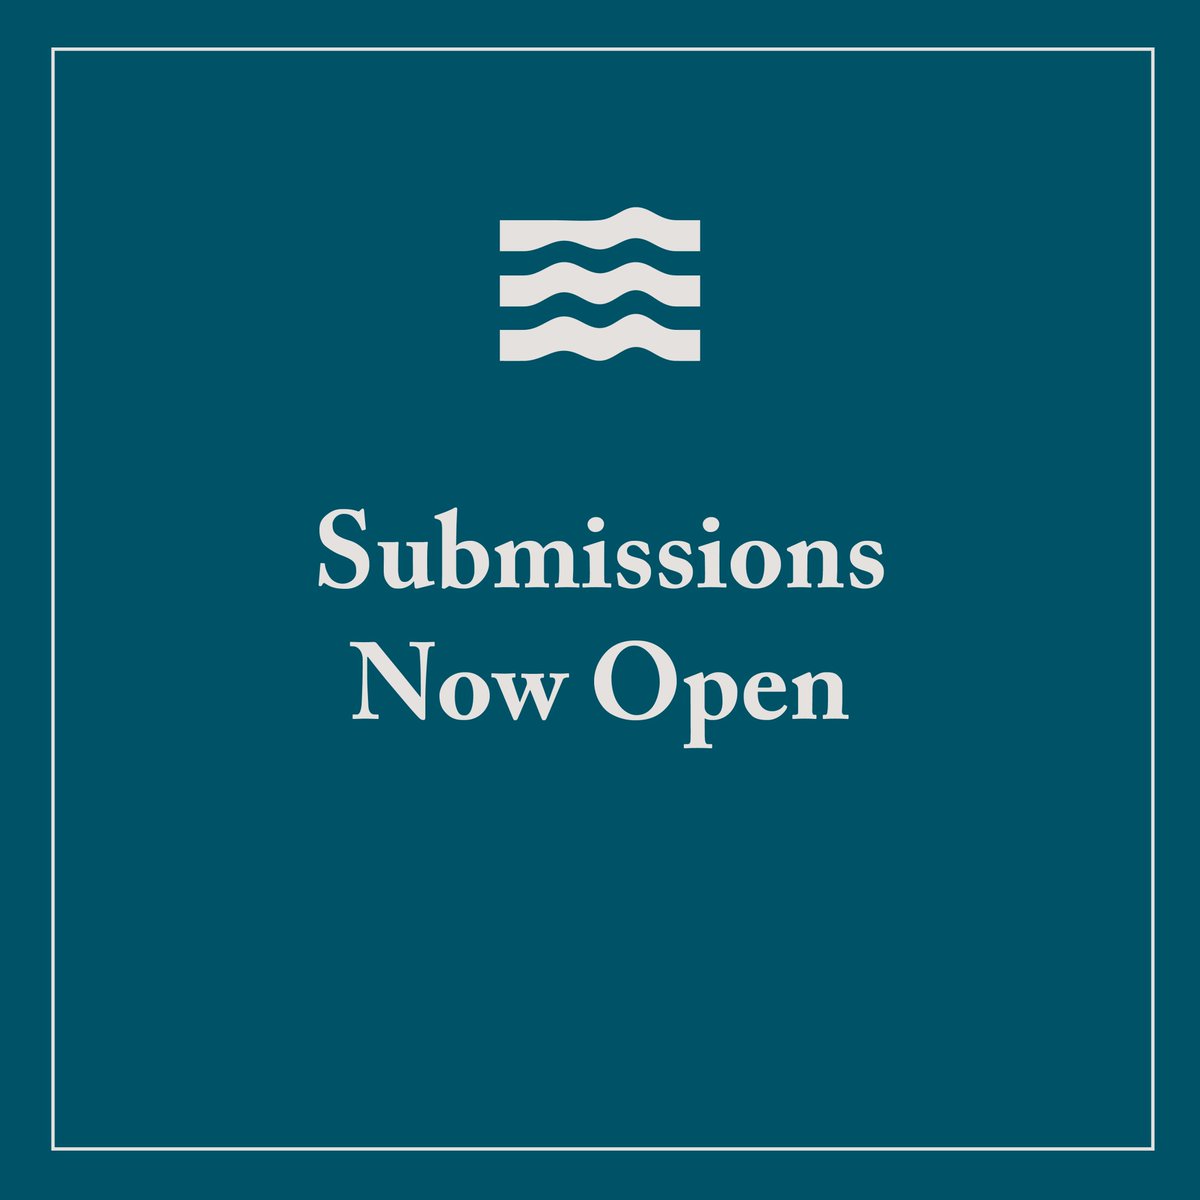 Submissions for TOLKA Issue Eight are now open. We publish all kinds of non-fiction, including essays, biography, autofiction, and things that fall between. Submit by midnight, Sunday 5 May. Guidelines and link to submit here: tolkajournal.org/submit